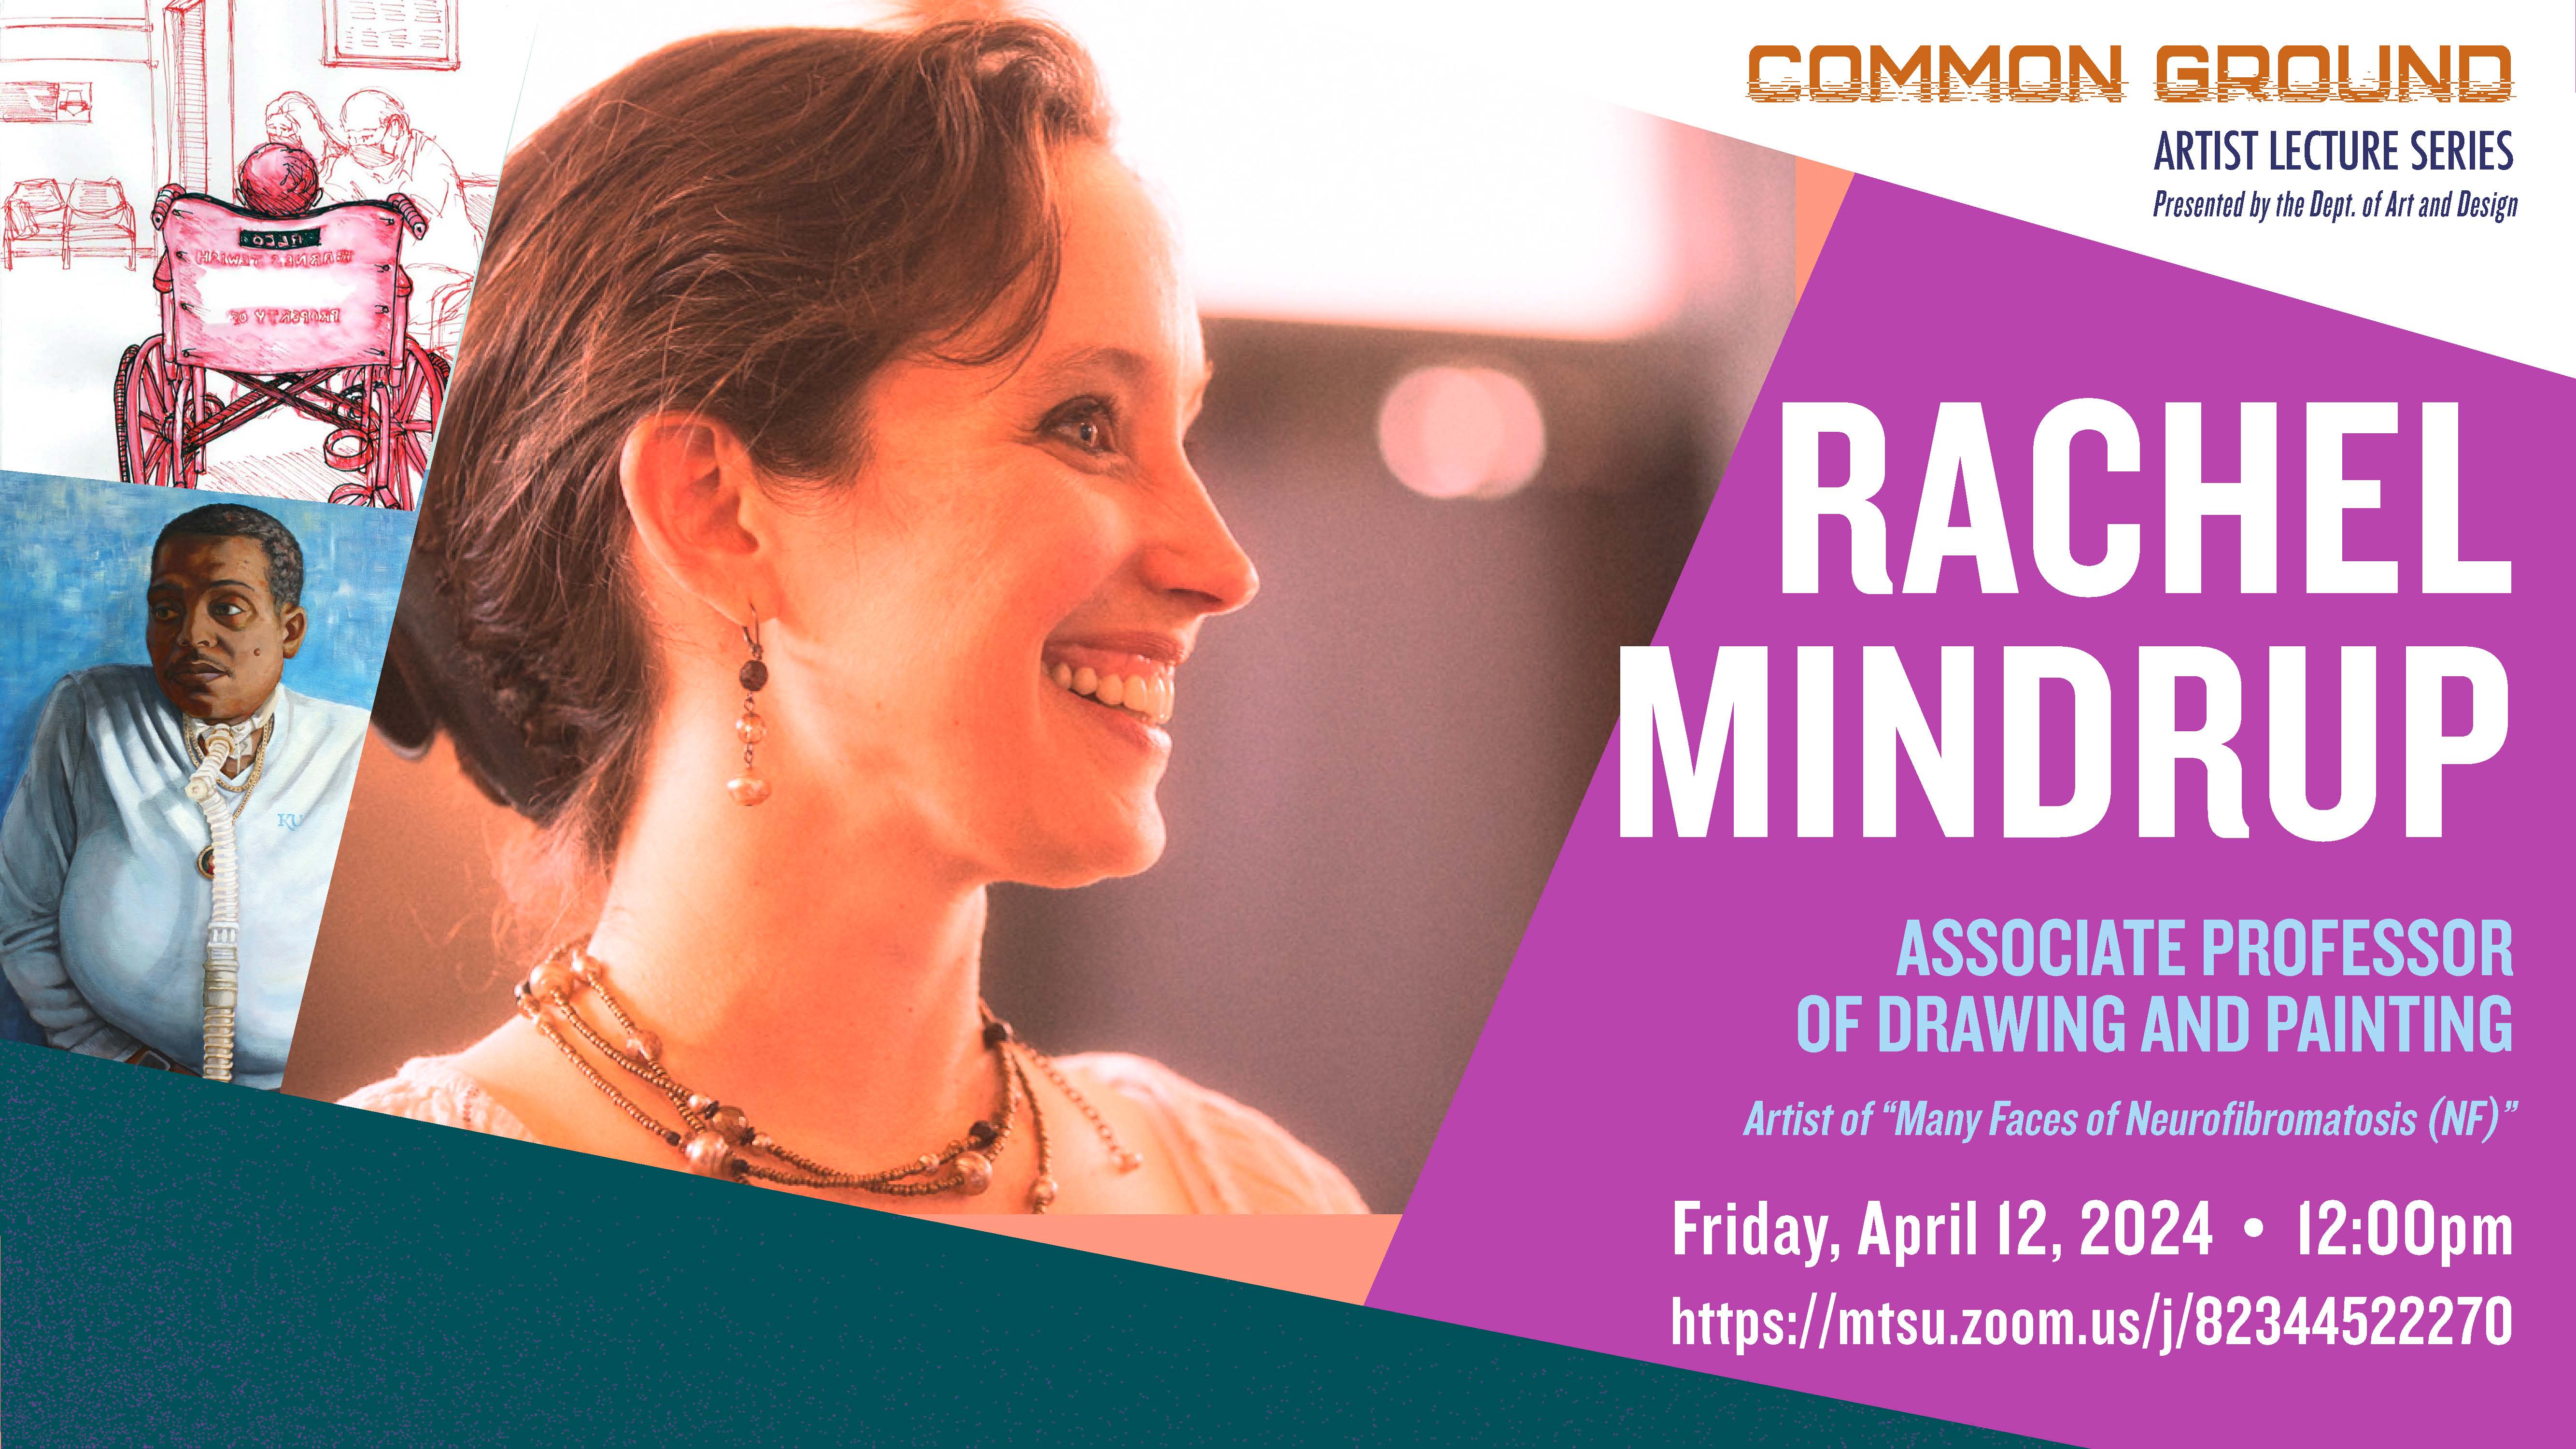 Common Ground Lecture Series with Rachel Mindrup